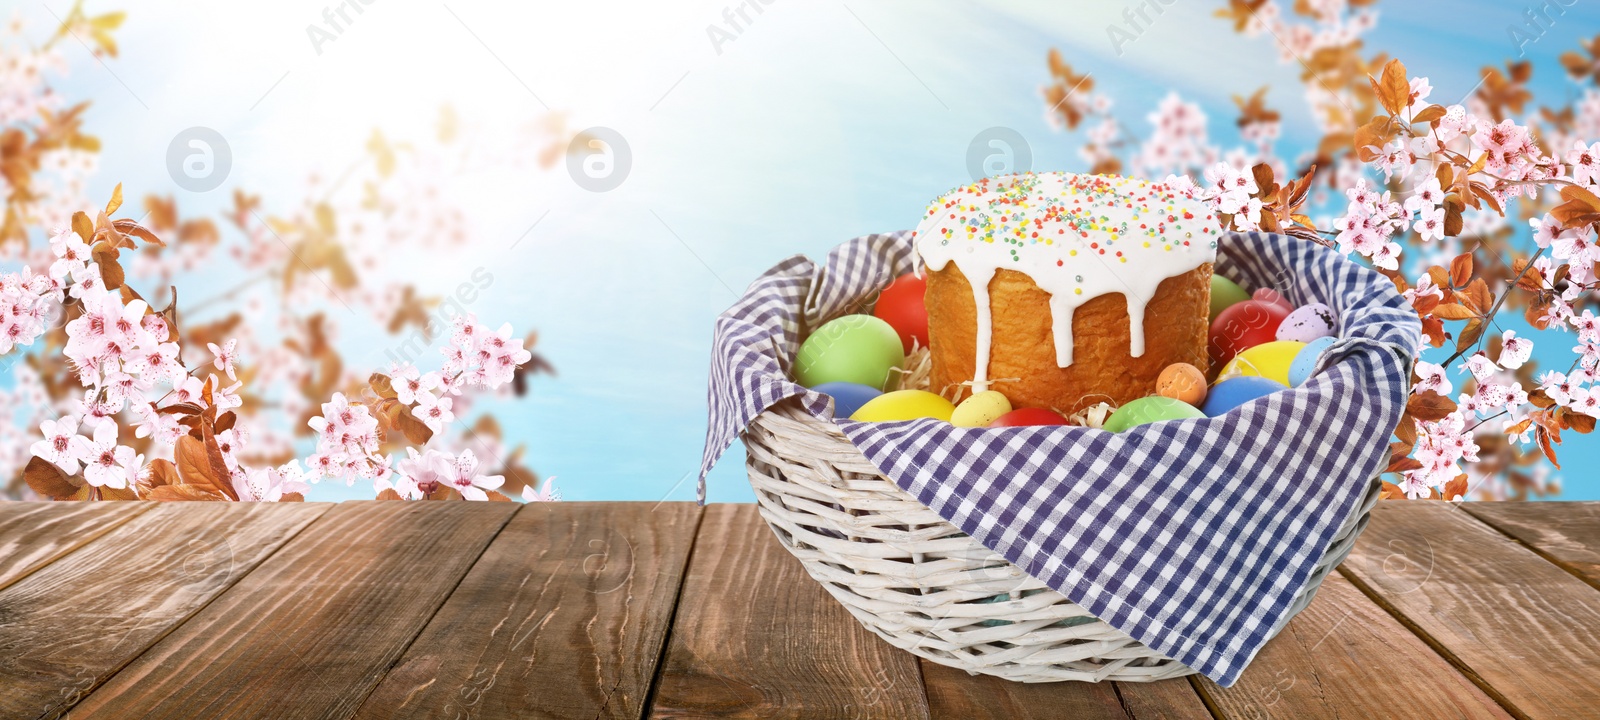 Image of Basket with traditional Easter cake and eggs on wooden table outdoors, space for text. Banner design